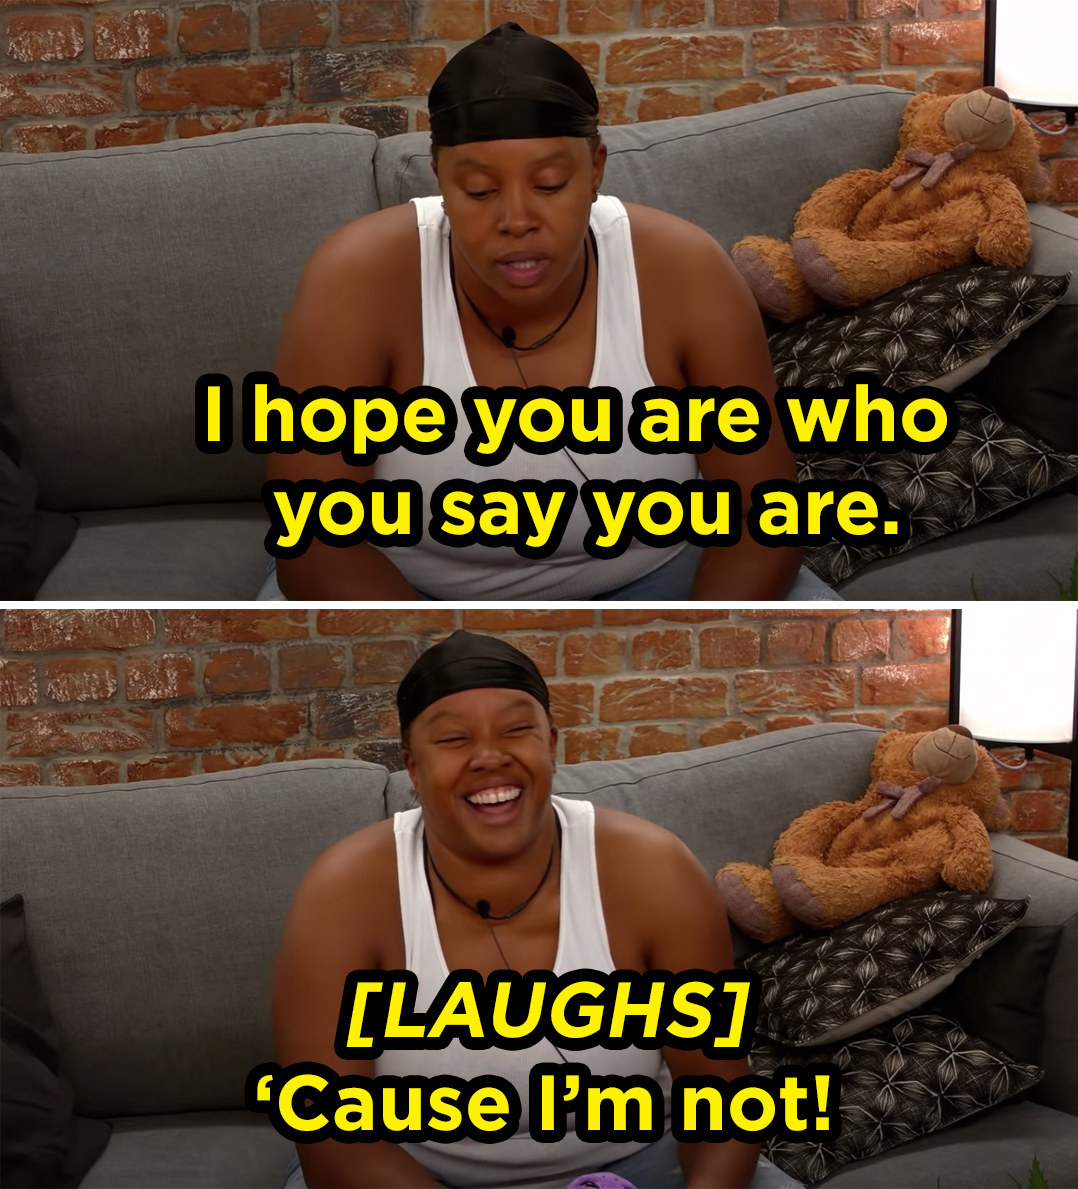 a woman wearing a du rag and tank top sits on a couch alone in a room, looking at a screen. she is laughing, all teeth showing. she says &quot;i hope you are who you say you are, &#x27;cause i&#x27;m not!&quot;